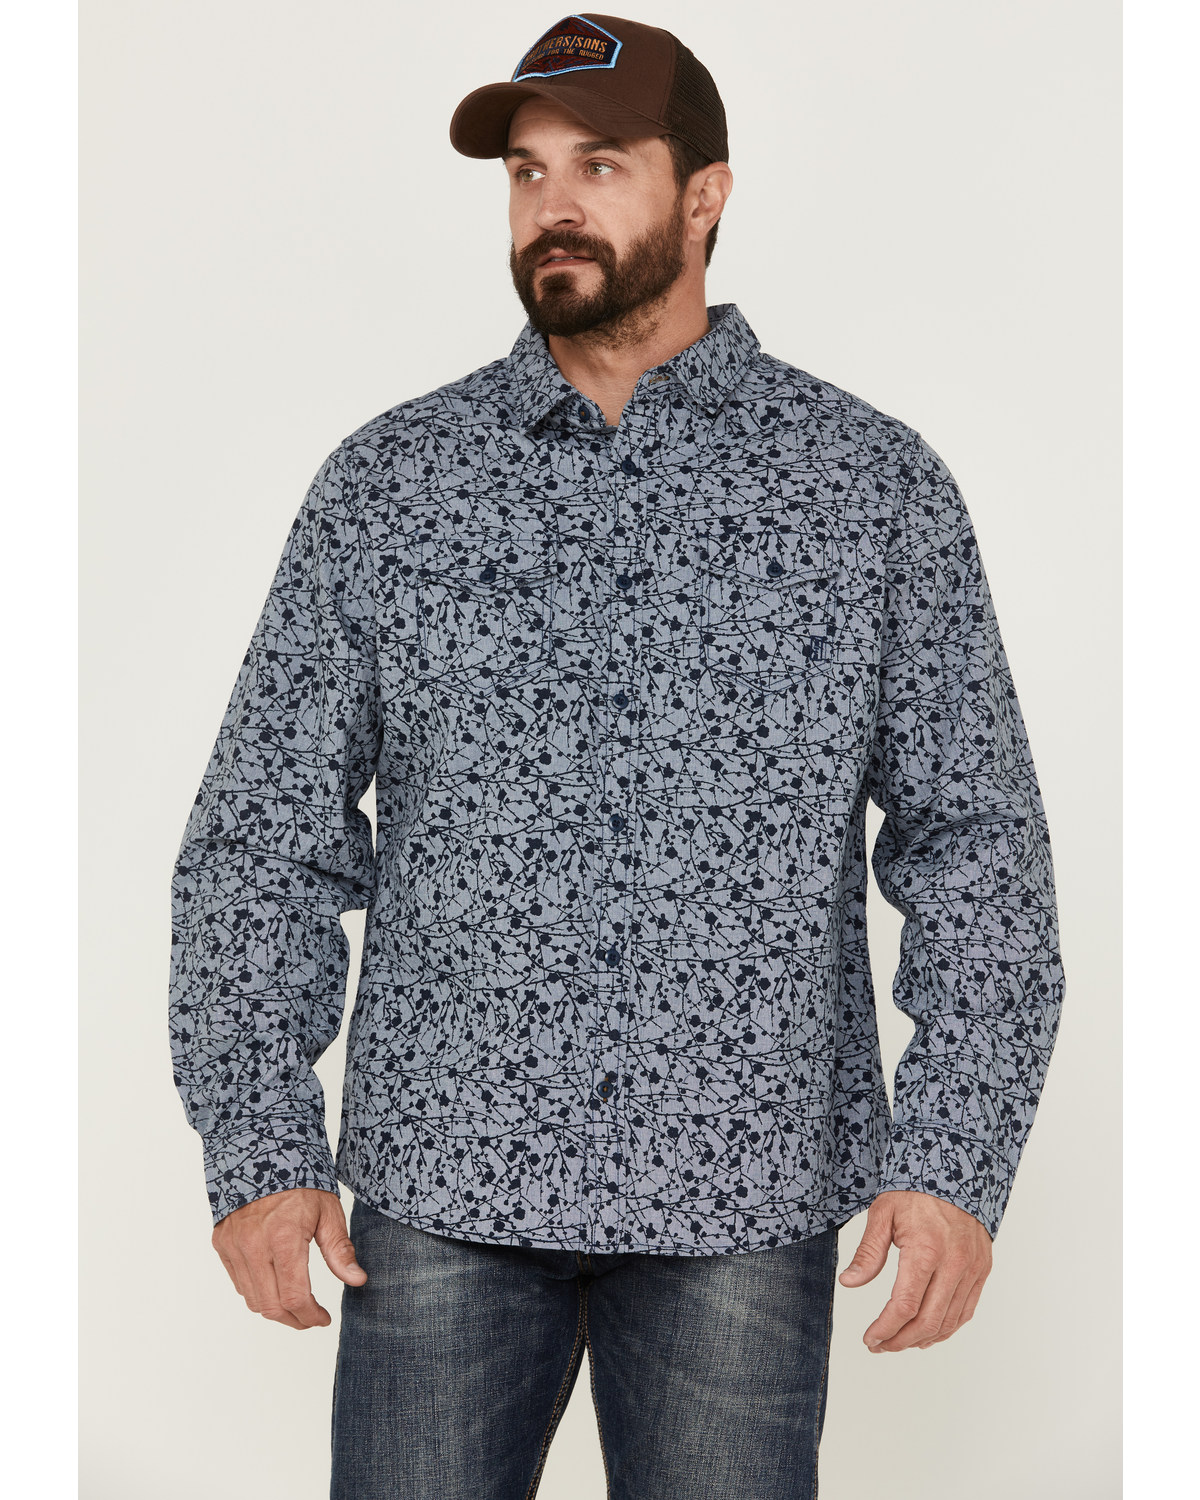 Brothers and Sons Men's All-Over Print Long Sleeve Button Down Western Shirt